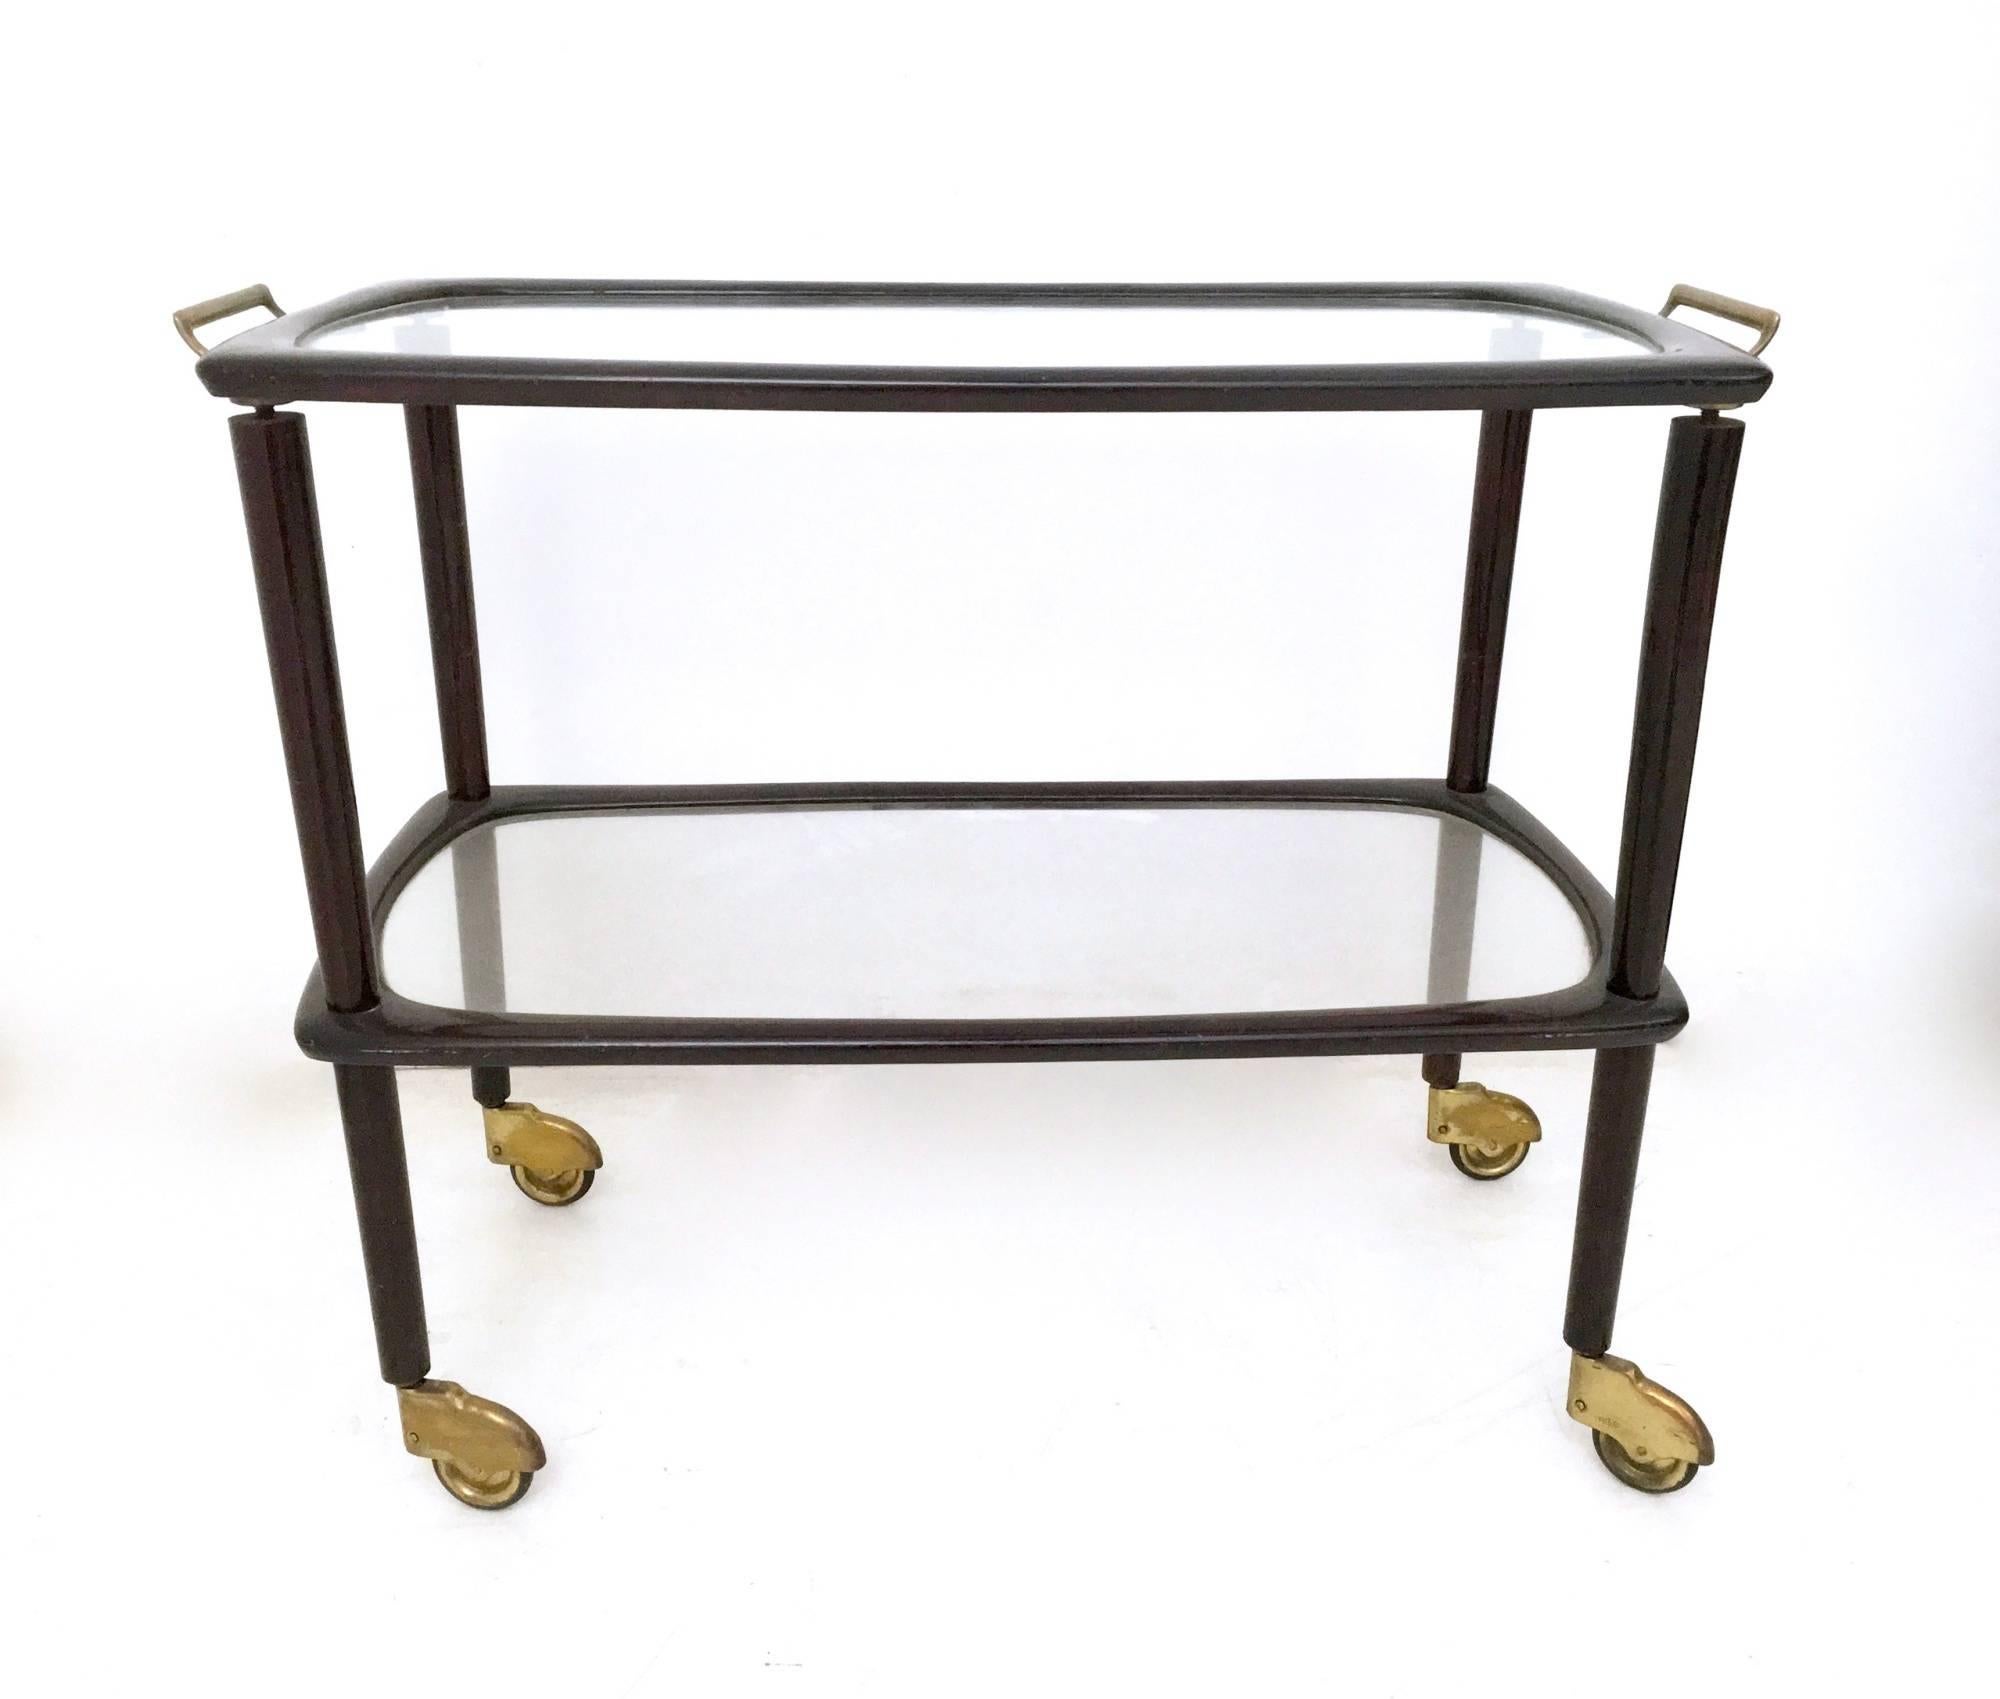 Made in beech, brass and glass.
The top tray can be removed.
In excellent original condition and ready to become a piece in a home.

Measures: Width 83 cm
Depth 40 cm
Height 66 cm.